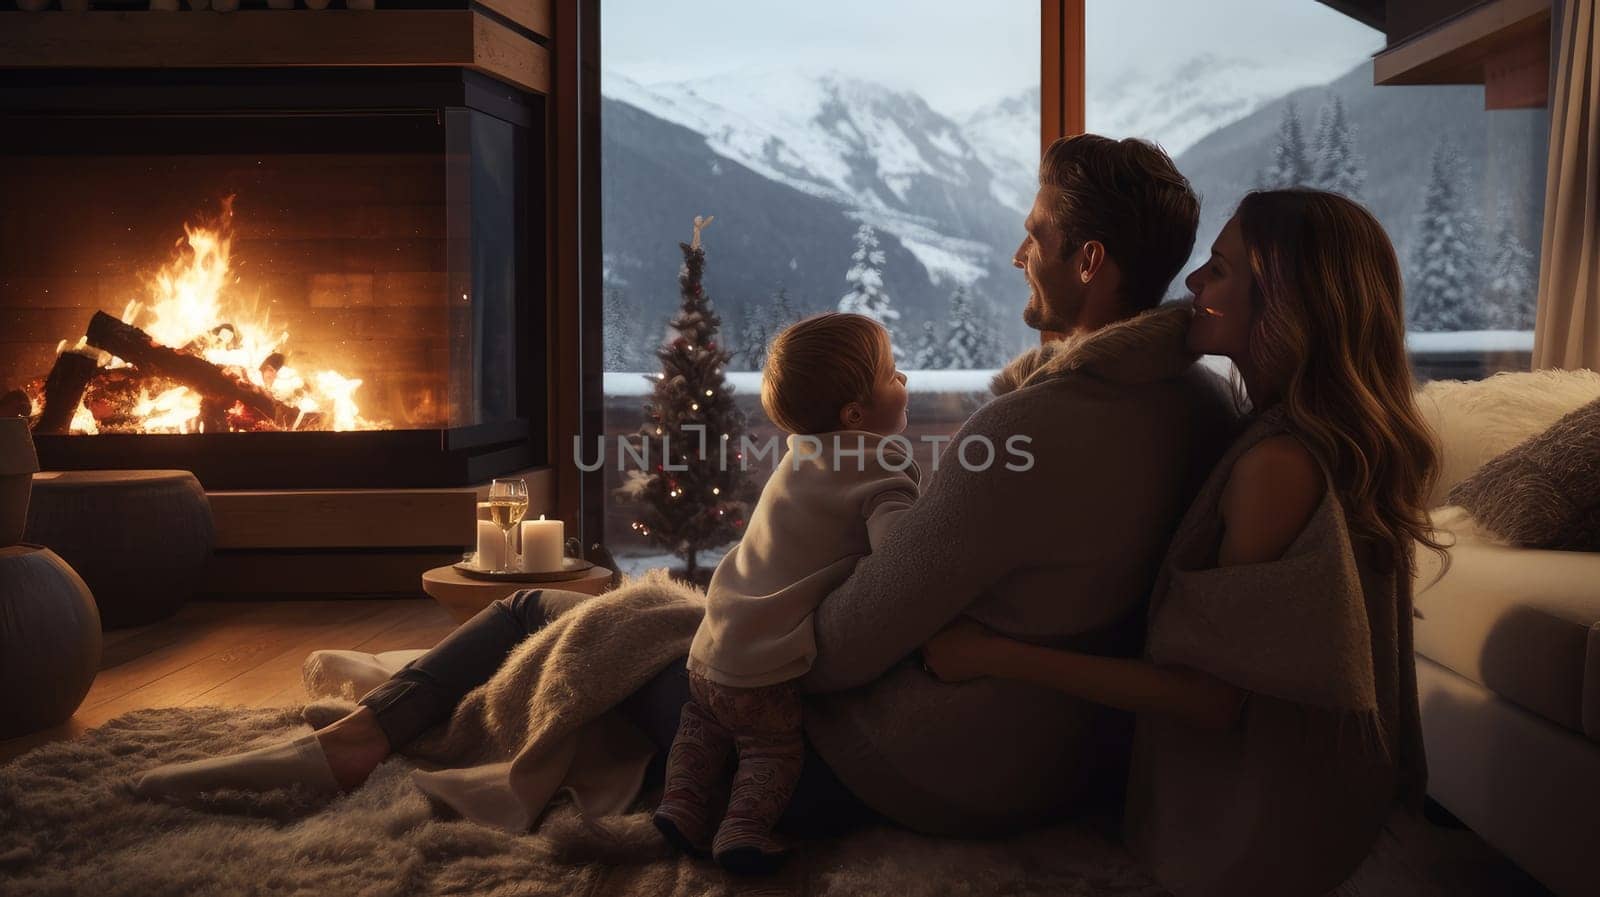 Family in a luxurious room with panoramic windows in an ecological chalet hotel at an Alpine ski resort overlooking the snowy landscape and mountains. Concept of traveling around the world, recreation, winter sports, vacations, tourism